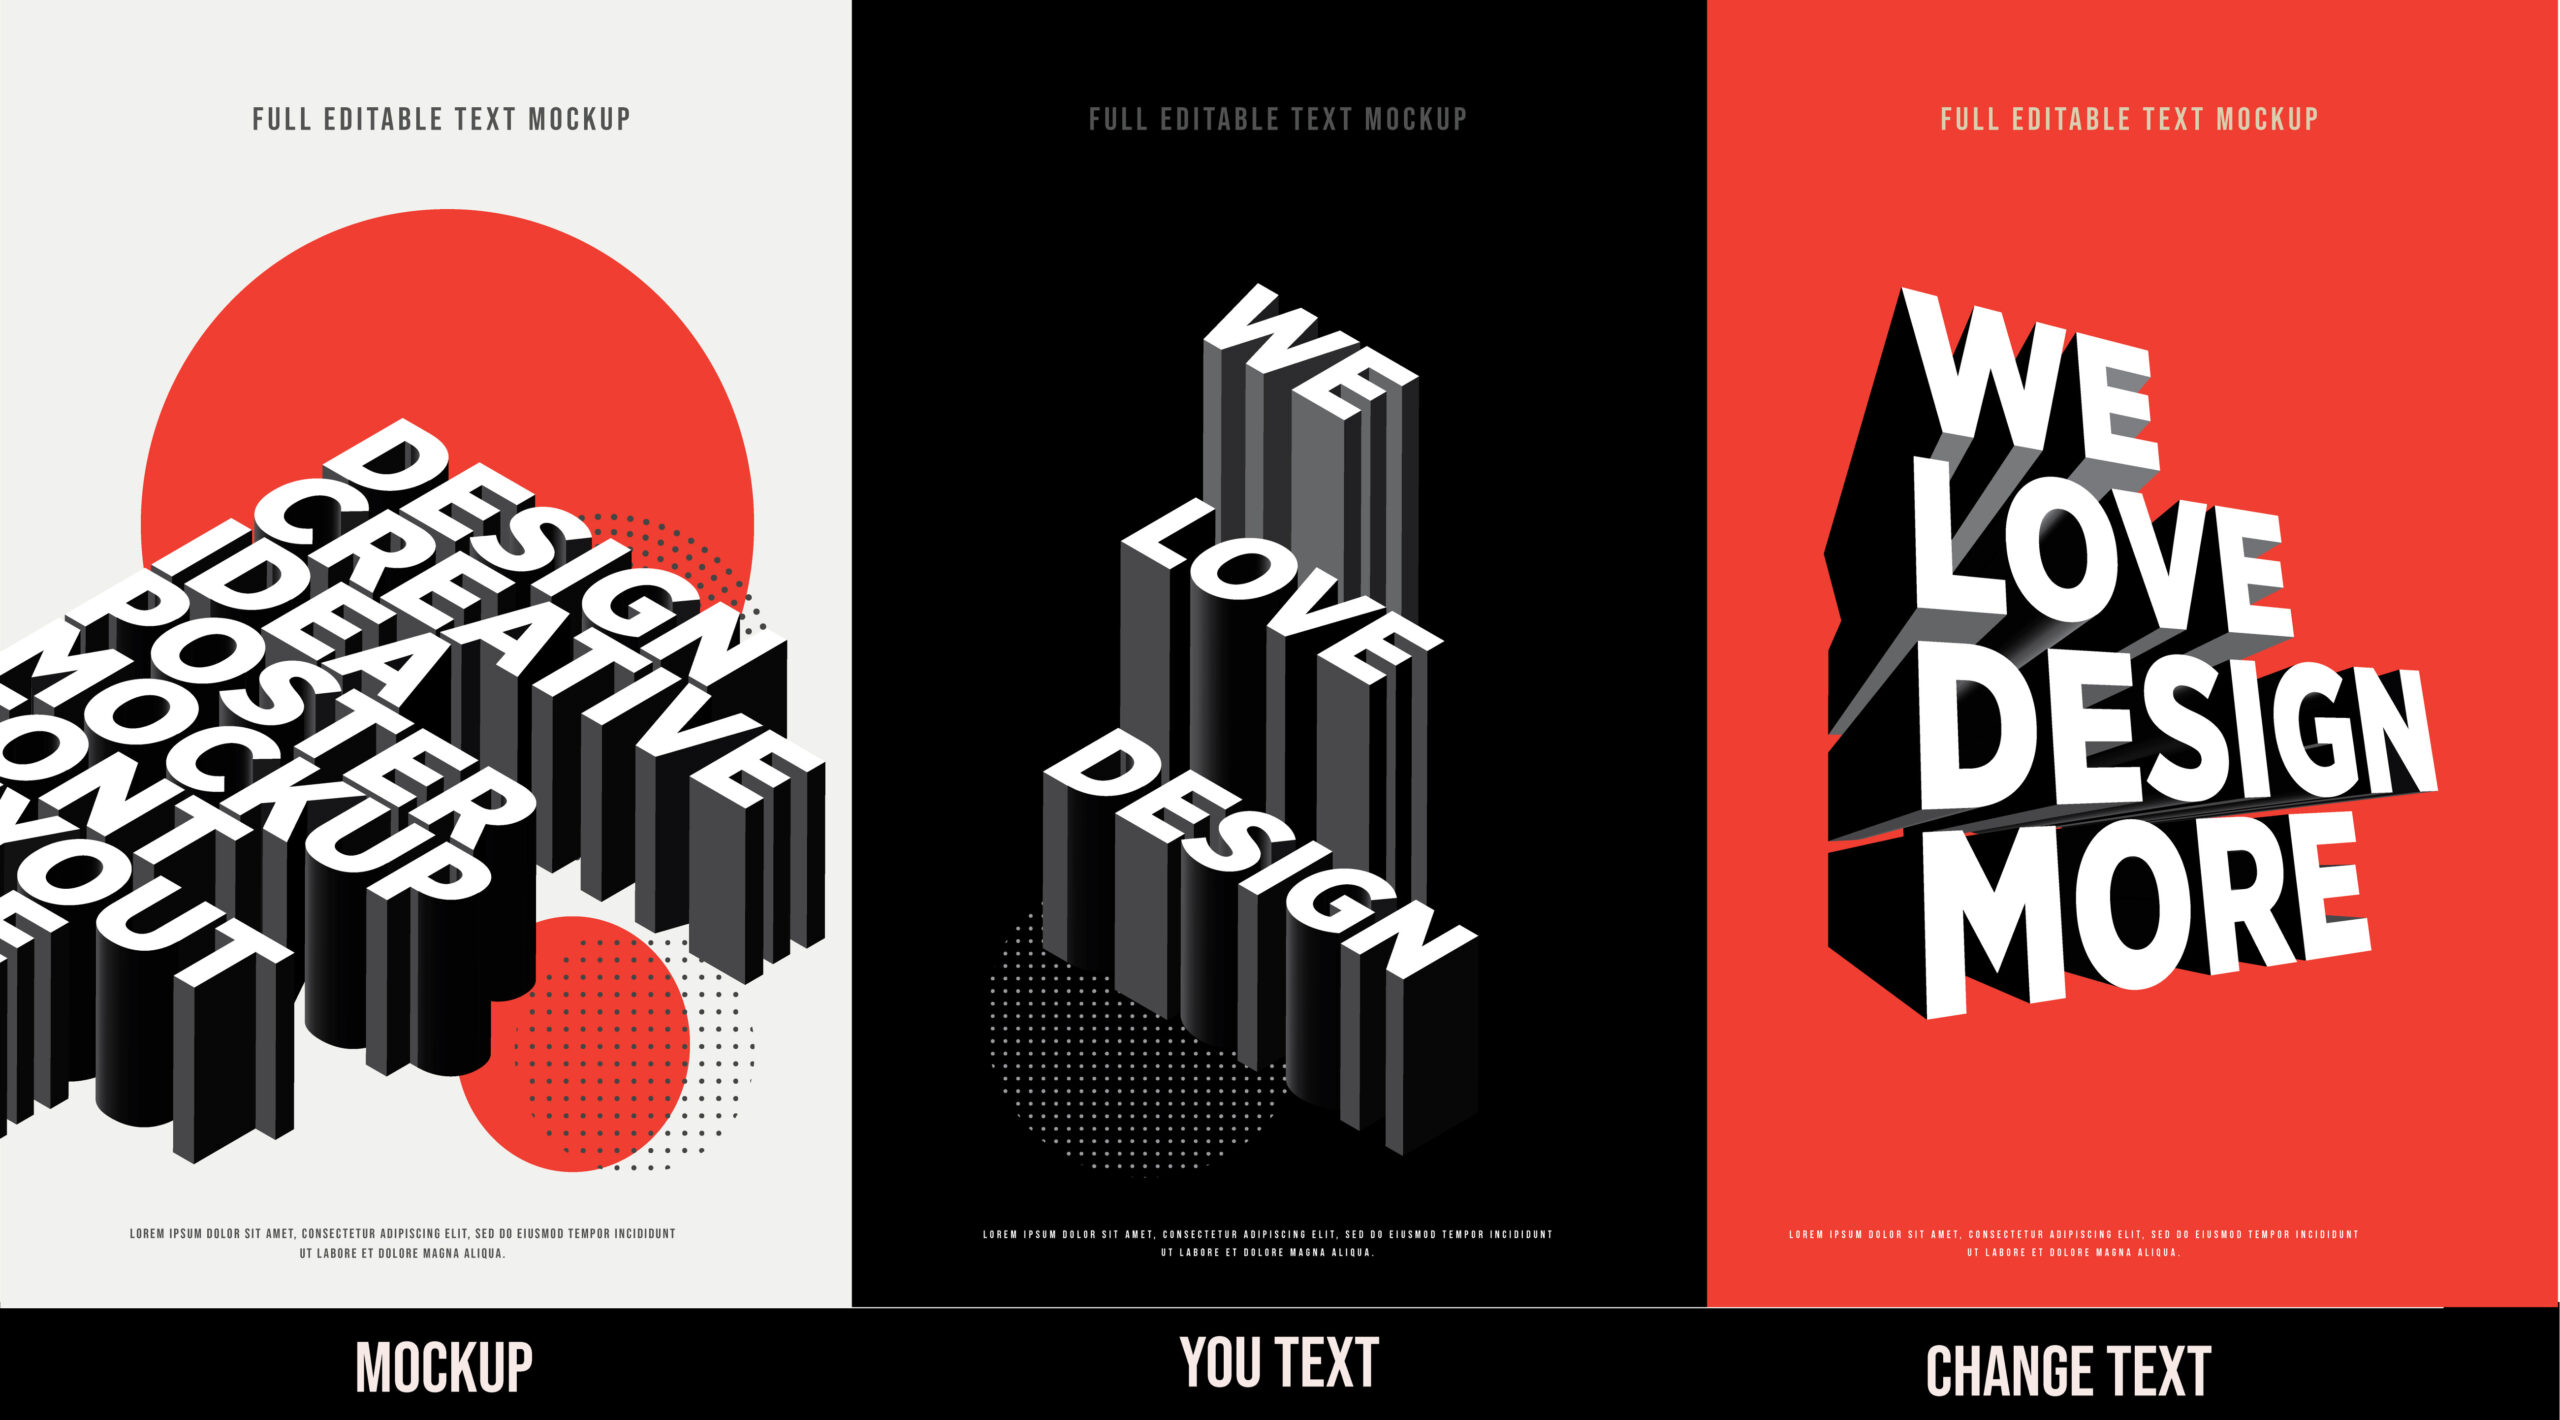 image containing 3 examples of typography